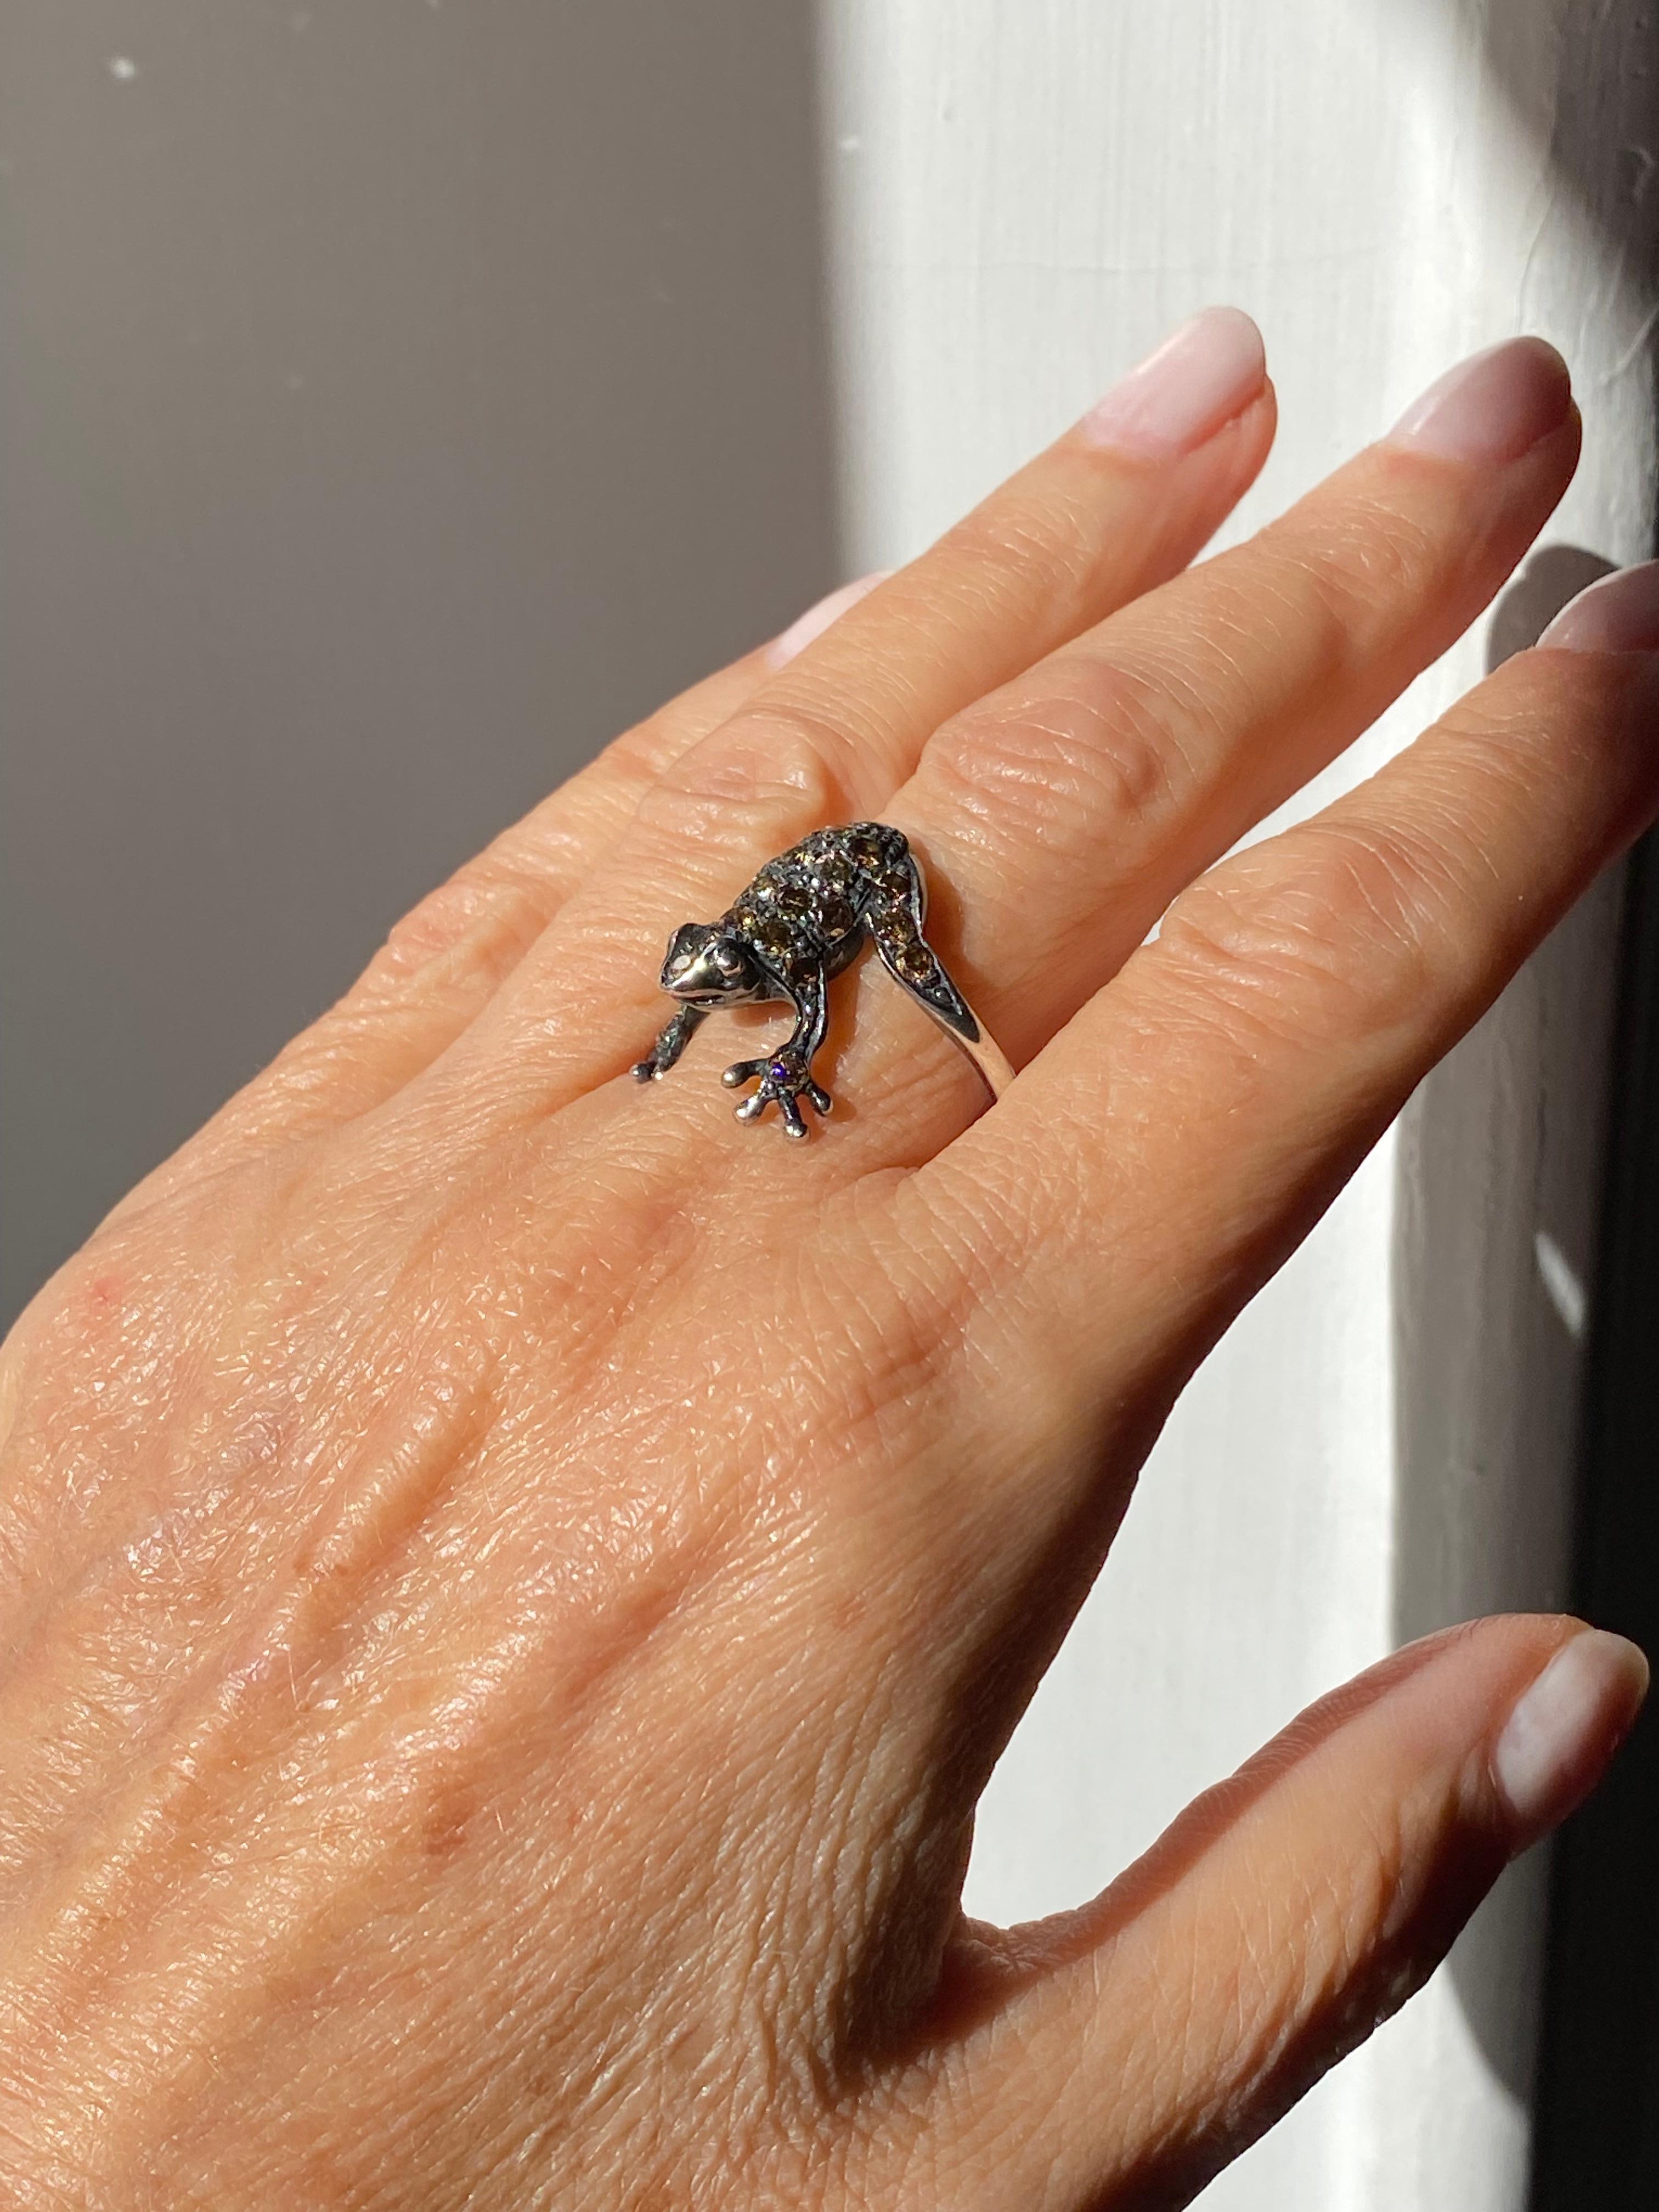 This is a piece from Rossella Ugolini collection of contemporary jewels, a new version of a frog ring handcrafted in Platinum with 1.05 Karats Brown Diamonds.
A beautiful comfortable and funny cocktail ring handcrafted in platinum and enriched with